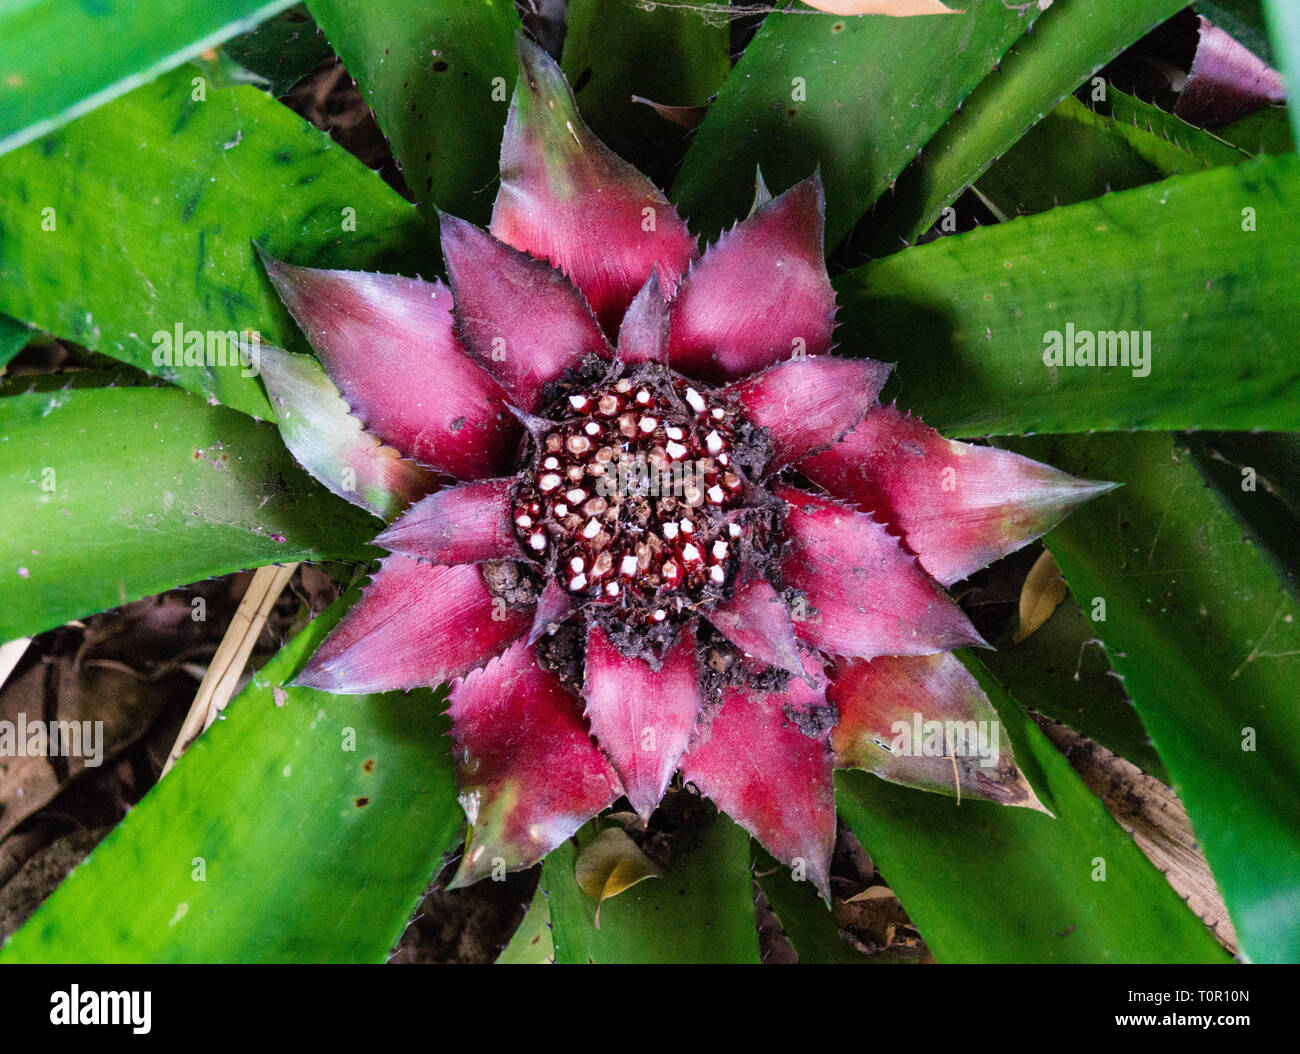 Canistrum giganteum Bromeliaceae Tropical flower from brazil Stock Photo